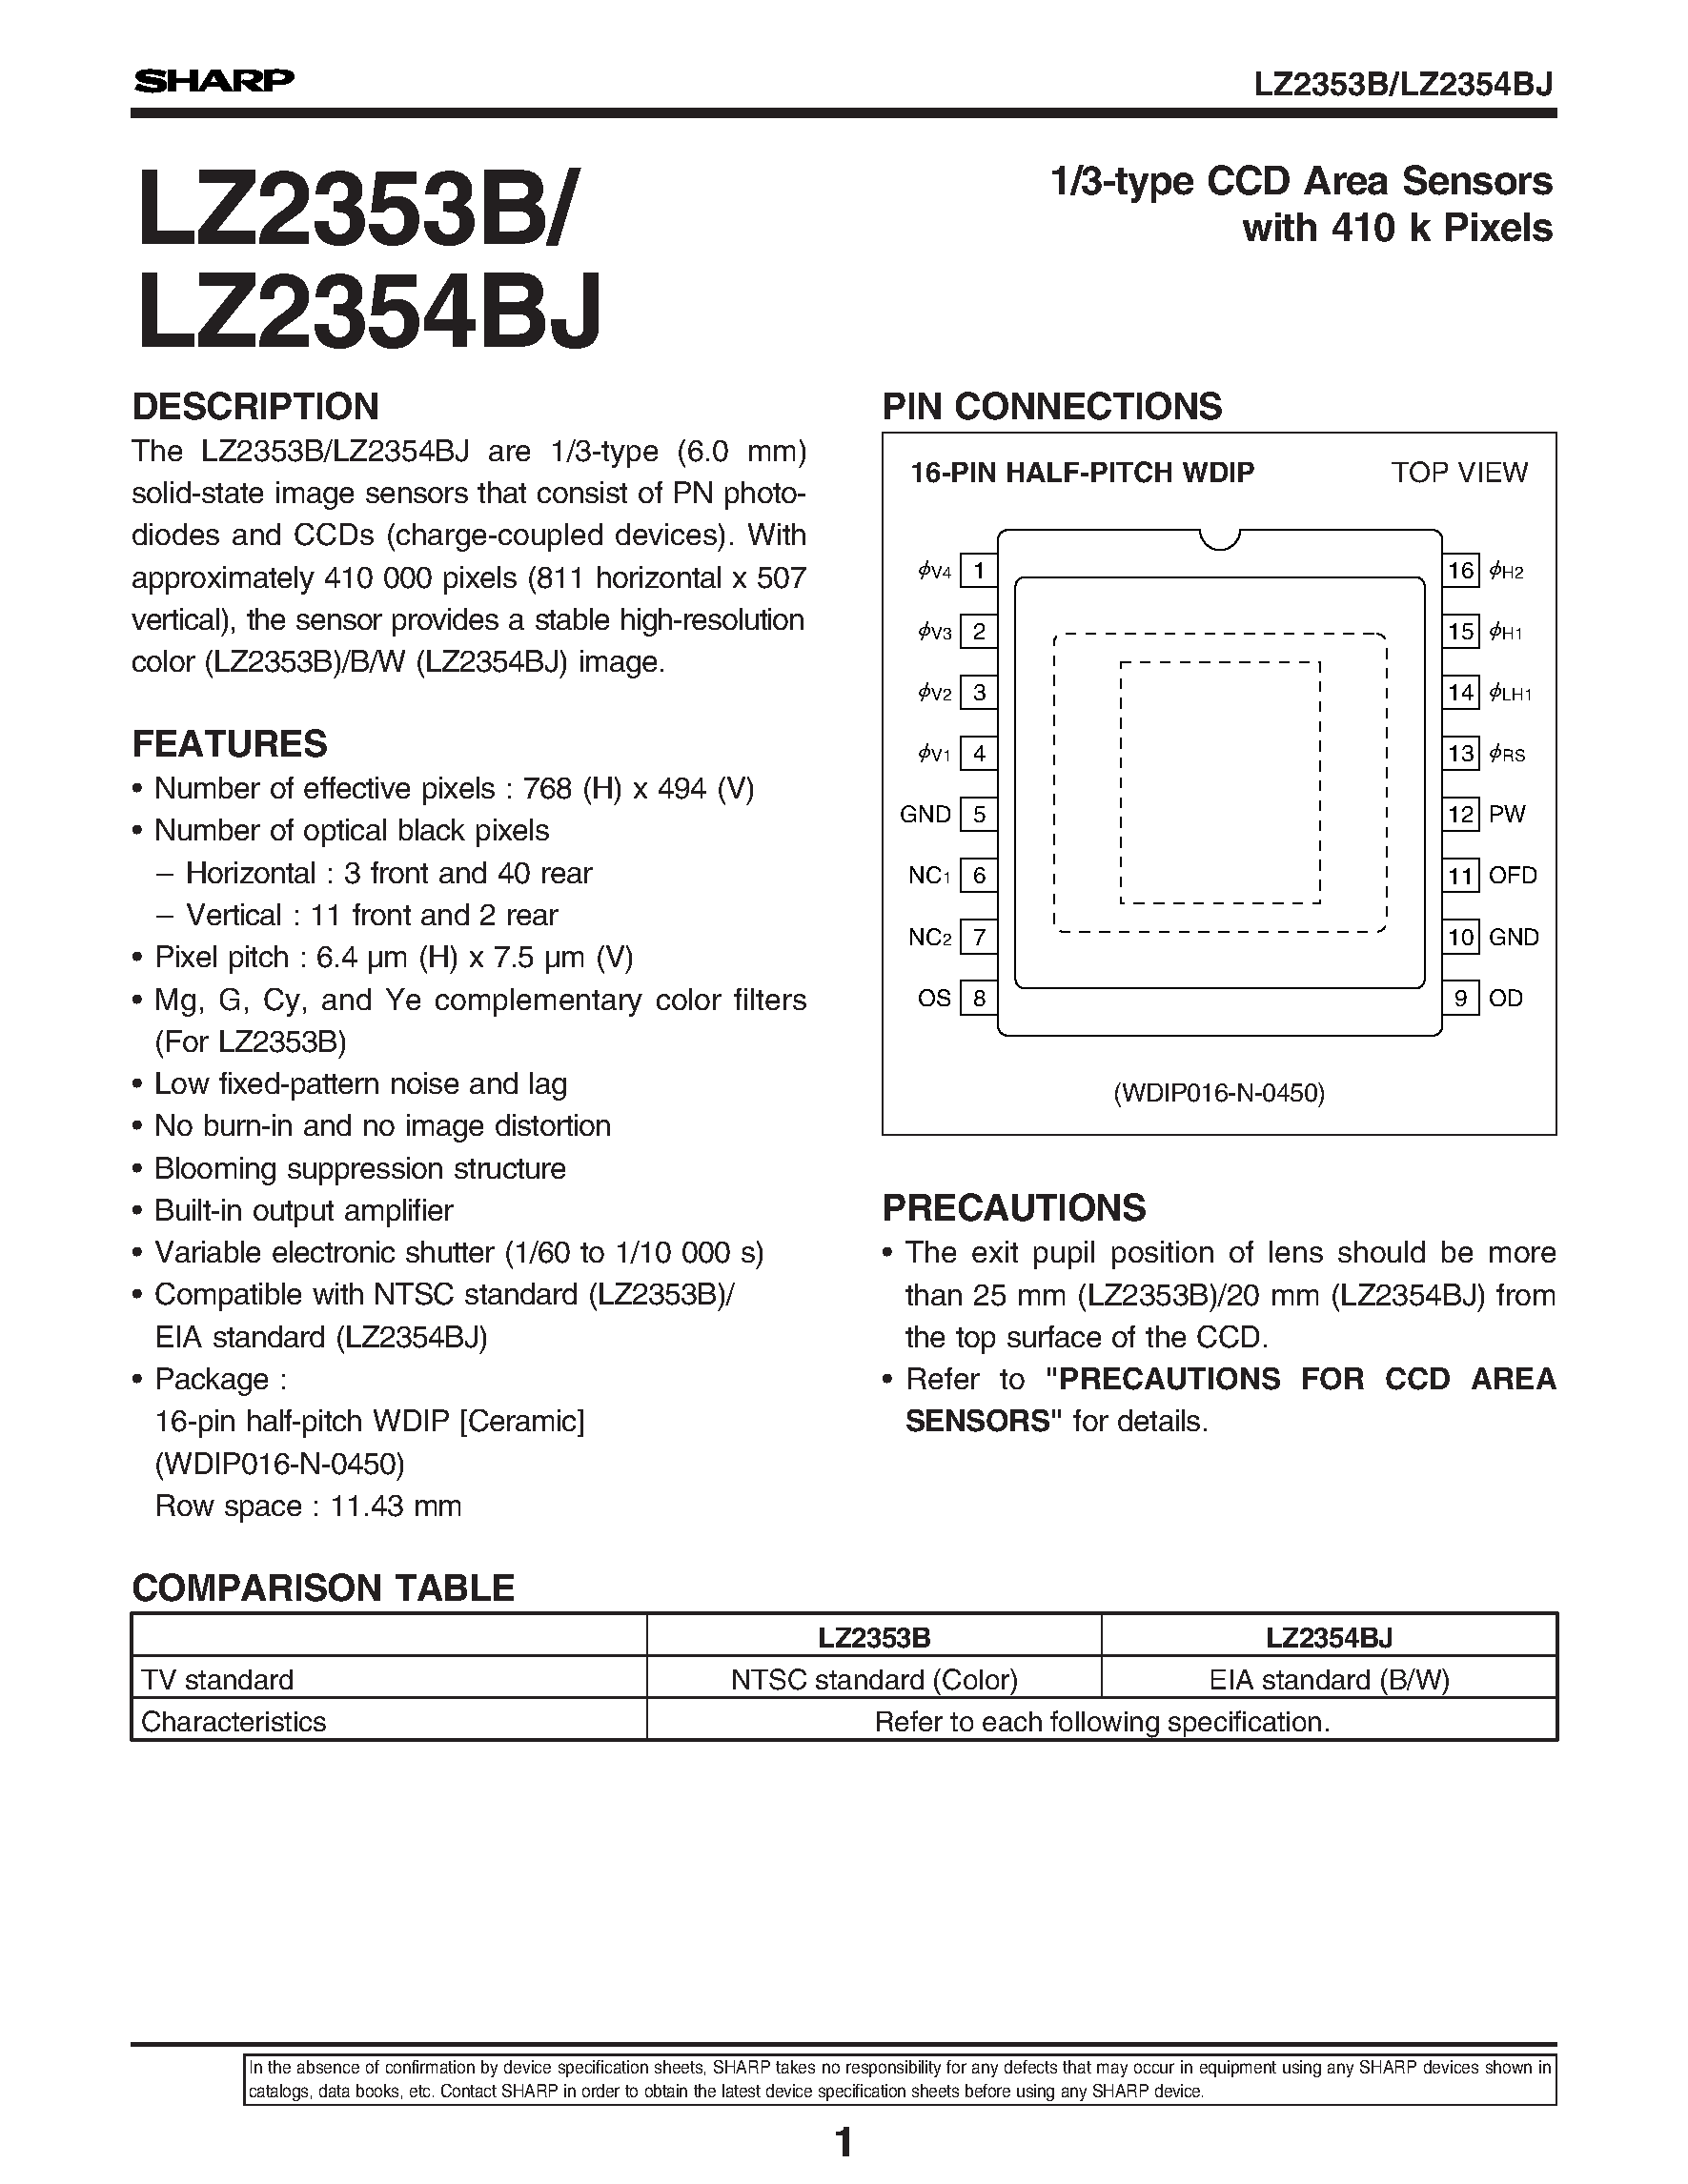 Datasheet LZ2353B - 1/3-type CCD Area Sensors with 410 k Pixels page 1